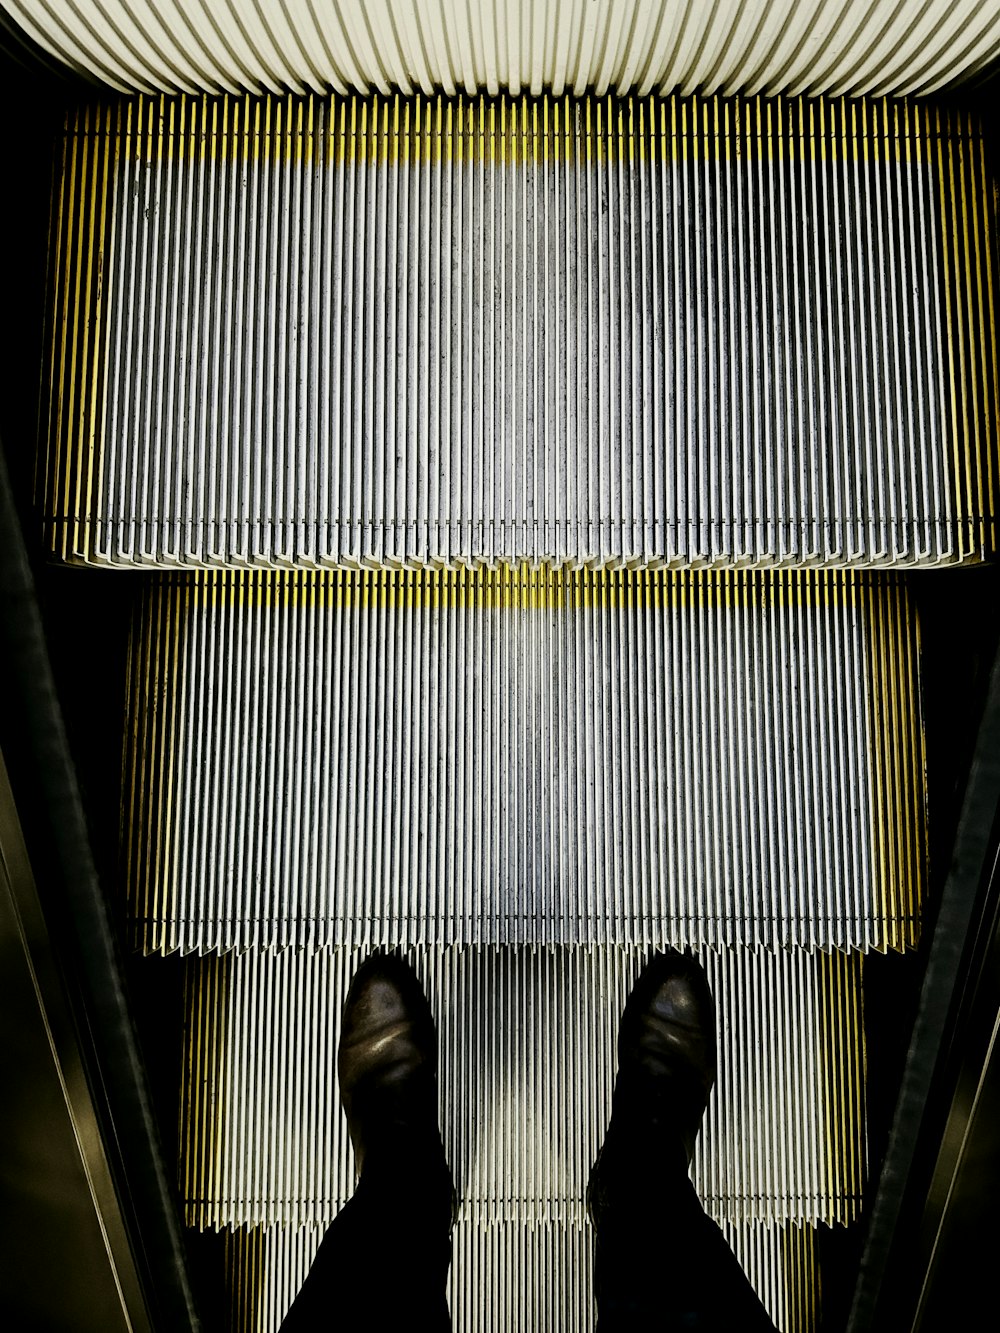 a person standing on an escalator with their feet up